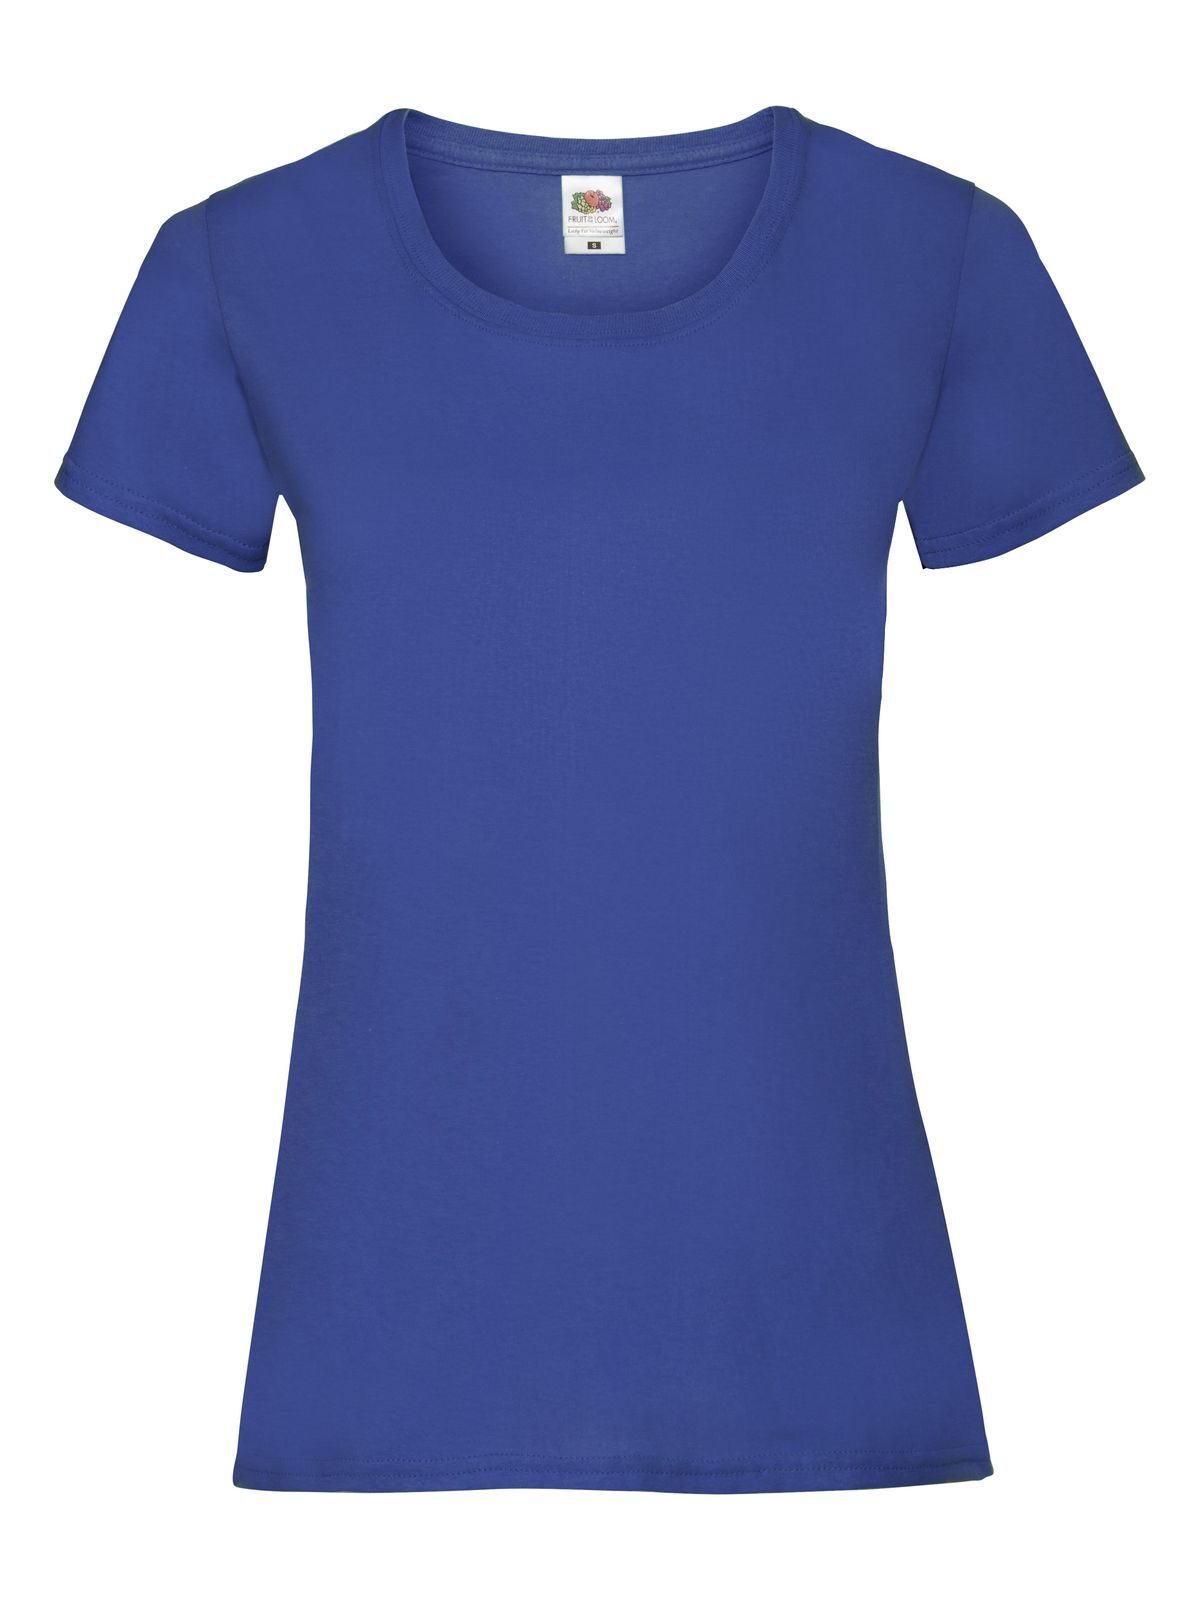 Pittogramma Ladies Valueweight T - FR613720 royal blue